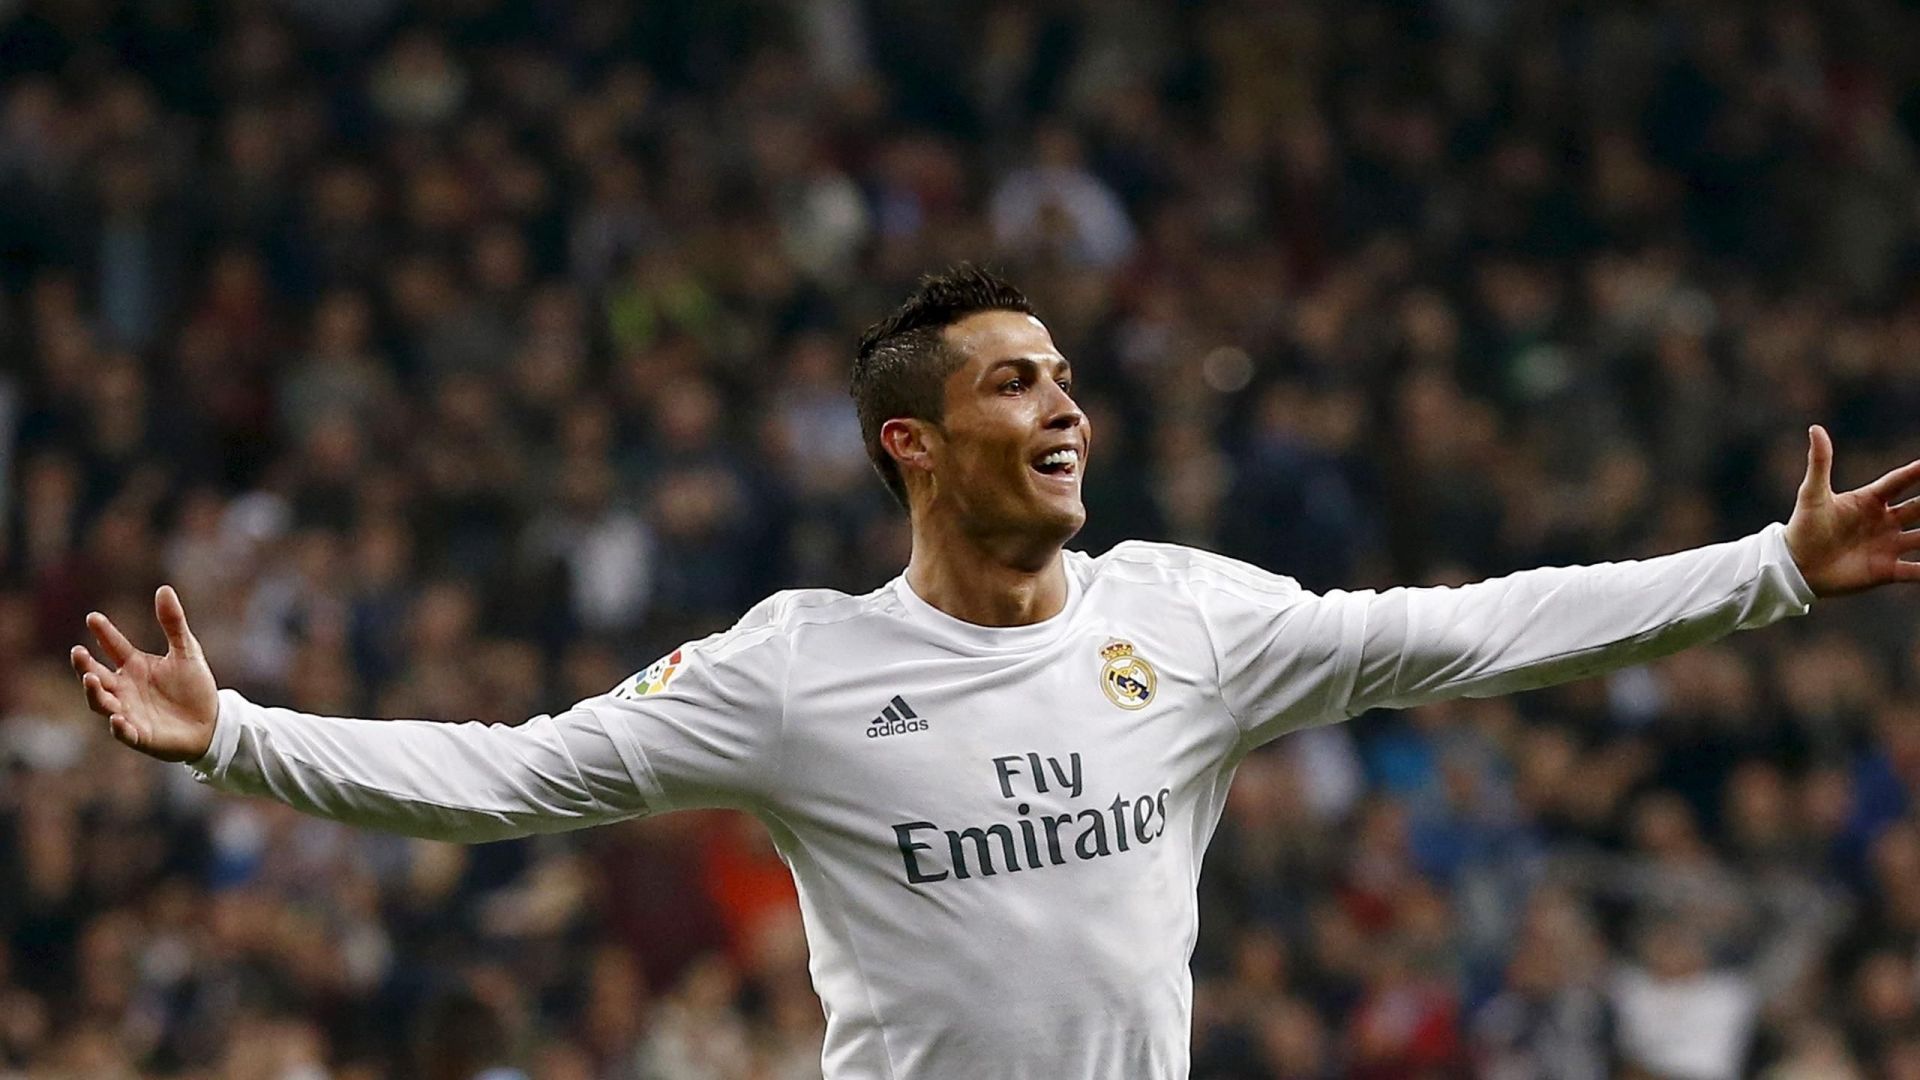 Ronaldo was involved in all six goals in the magical night